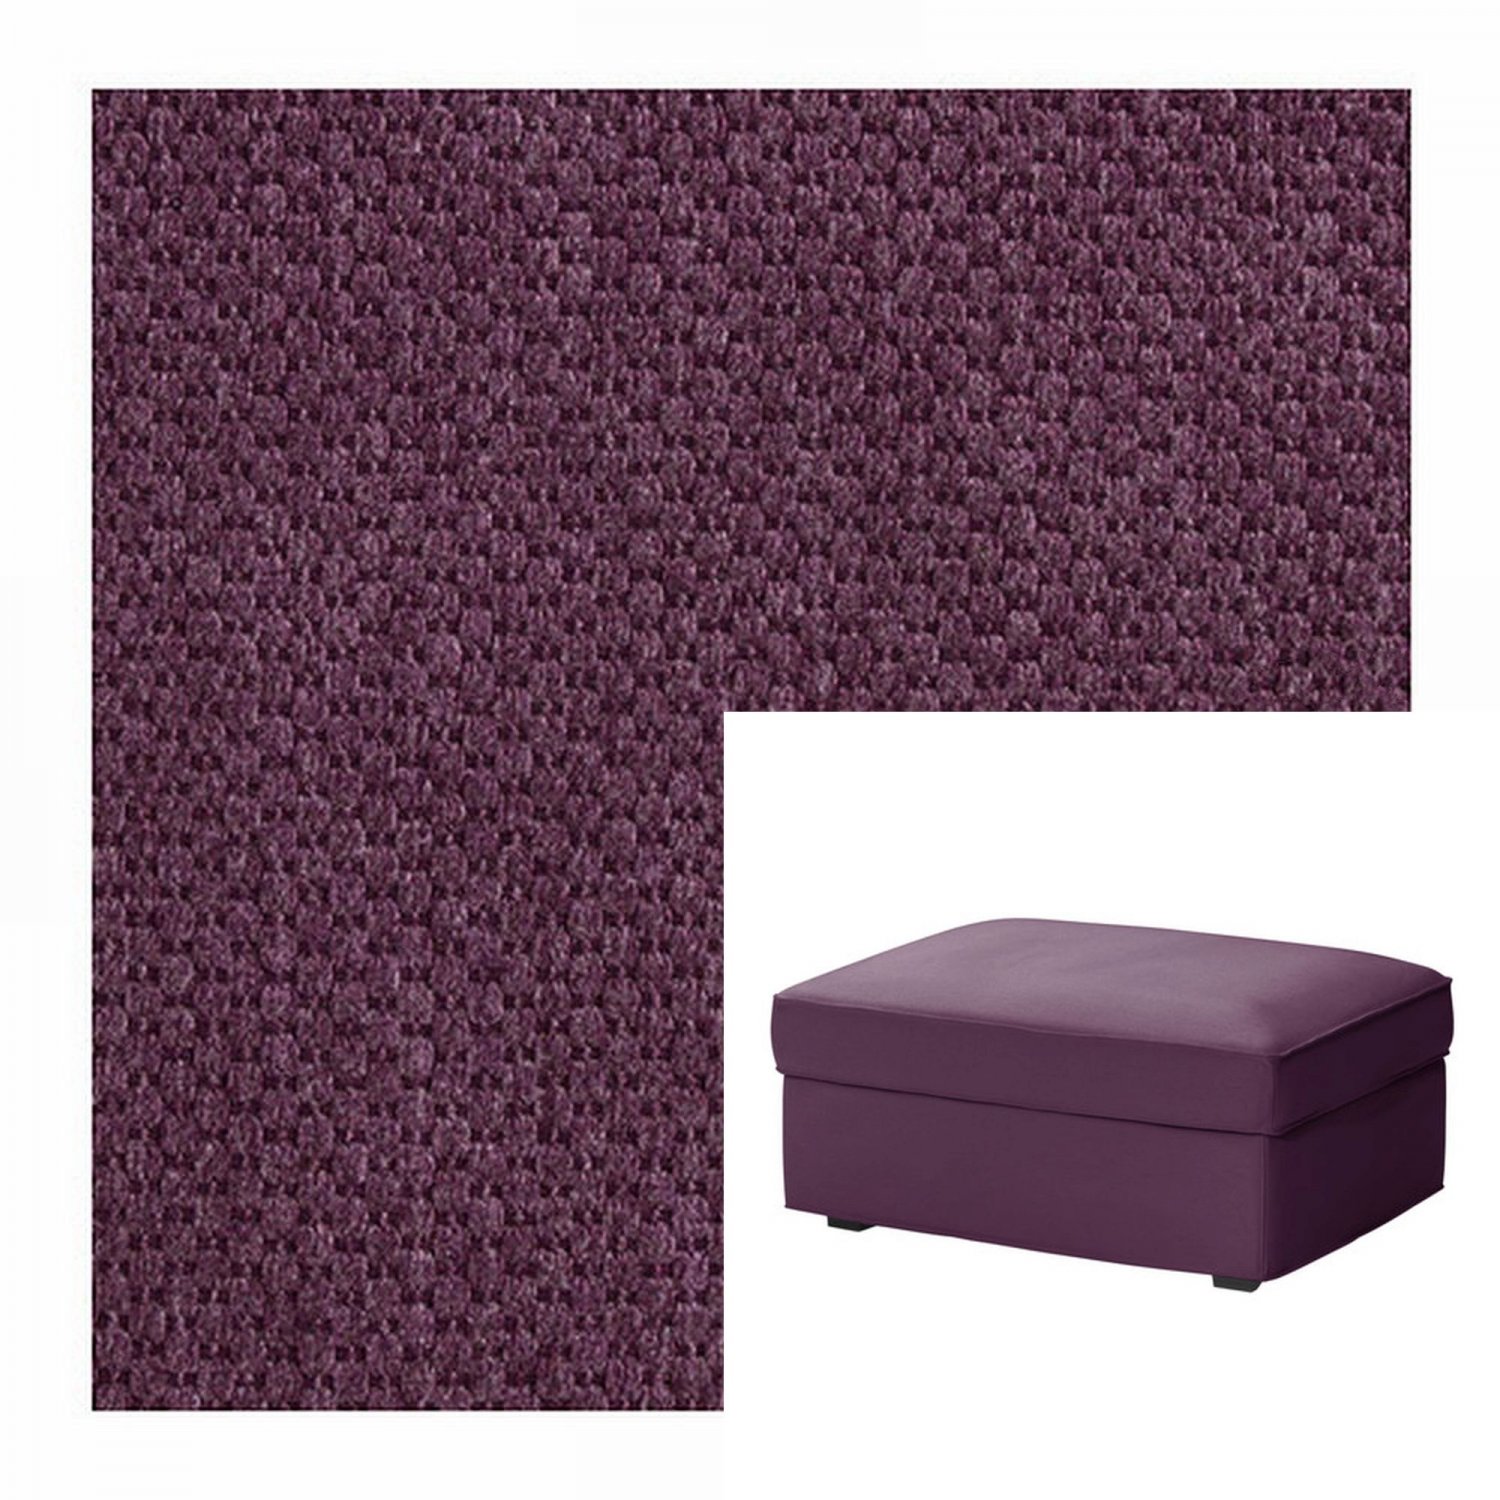 Details about   New Original Ikea Kivik Footstool Ottoman Cover Slipcover Dansbo Red Lilac 